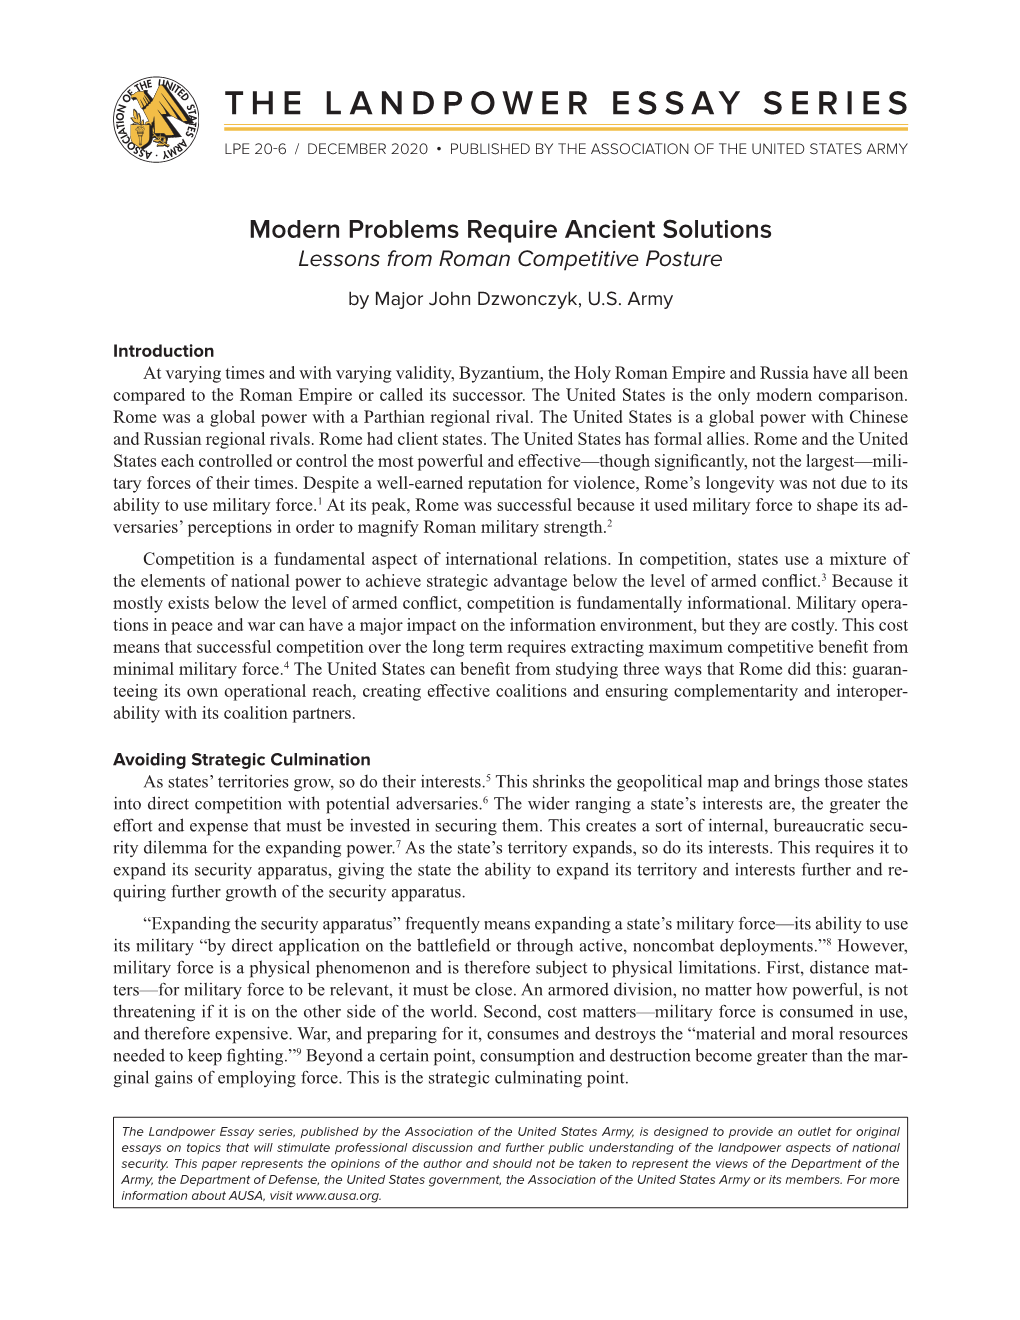 Download LPE-20-6-Modern-Problems-Require-Ancient-Solutions-Lessons-From-Roman